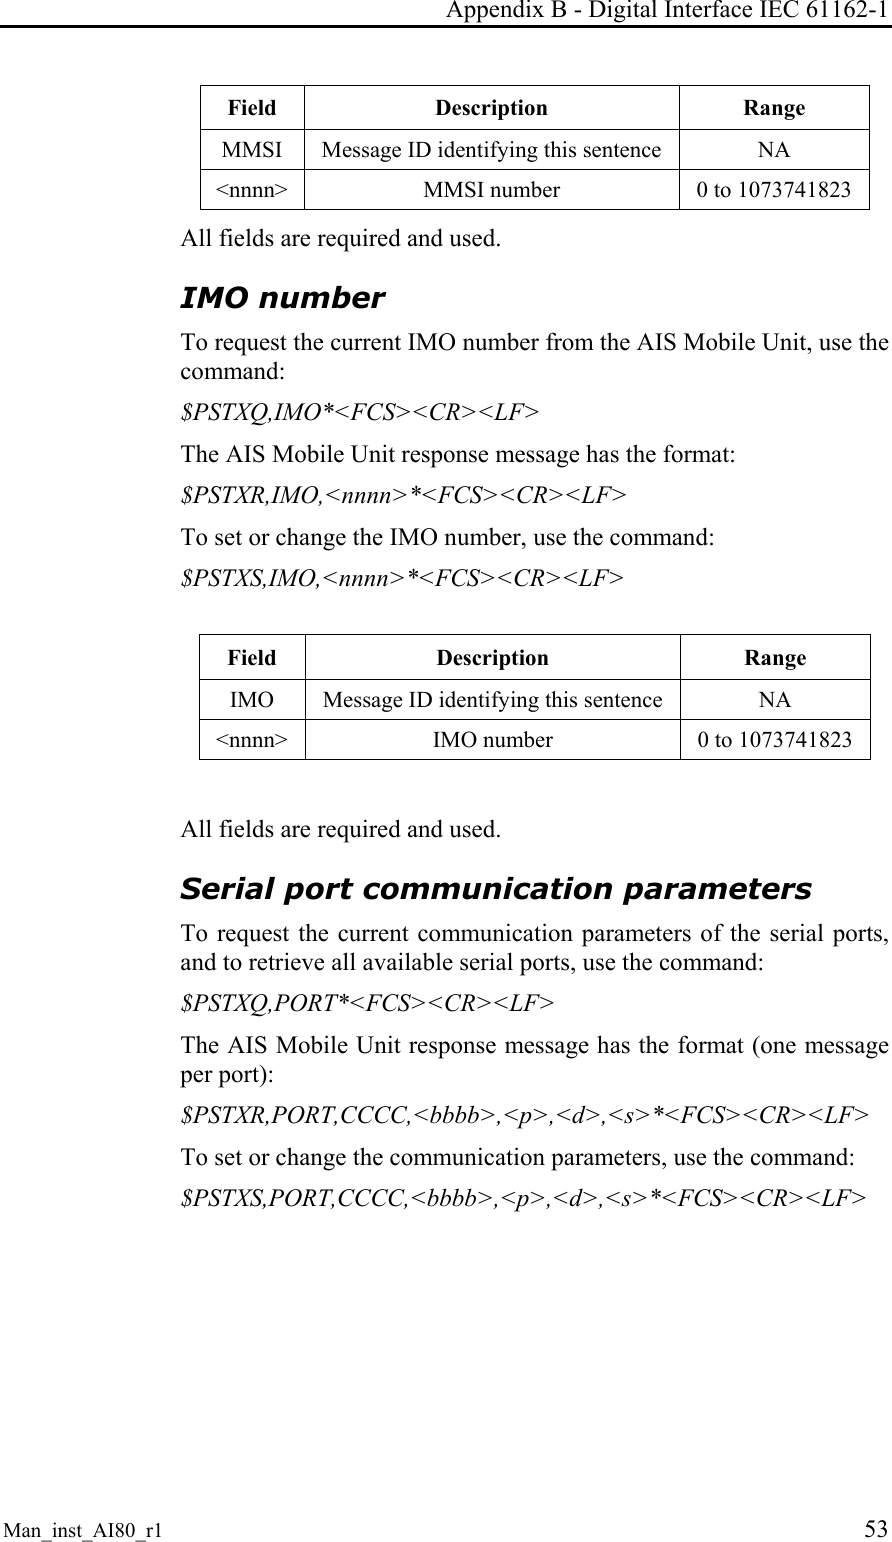 Appendix B - Digital Interface IEC 61162-1 Man_inst_AI80_r1 53 Field  Description  Range MMSI  Message ID identifying this sentence  NA &lt;nnnn&gt;  MMSI number  0 to 1073741823 All fields are required and used. IMO number To request the current IMO number from the AIS Mobile Unit, use the command: $PSTXQ,IMO*&lt;FCS&gt;&lt;CR&gt;&lt;LF&gt; The AIS Mobile Unit response message has the format: $PSTXR,IMO,&lt;nnnn&gt;*&lt;FCS&gt;&lt;CR&gt;&lt;LF&gt; To set or change the IMO number, use the command: $PSTXS,IMO,&lt;nnnn&gt;*&lt;FCS&gt;&lt;CR&gt;&lt;LF&gt;  Field  Description  Range IMO  Message ID identifying this sentence  NA &lt;nnnn&gt;  IMO number  0 to 1073741823  All fields are required and used. Serial port communication parameters To request the current communication parameters of the serial ports, and to retrieve all available serial ports, use the command: $PSTXQ,PORT*&lt;FCS&gt;&lt;CR&gt;&lt;LF&gt; The AIS Mobile Unit response message has the format (one message per port): $PSTXR,PORT,CCCC,&lt;bbbb&gt;,&lt;p&gt;,&lt;d&gt;,&lt;s&gt;*&lt;FCS&gt;&lt;CR&gt;&lt;LF&gt; To set or change the communication parameters, use the command: $PSTXS,PORT,CCCC,&lt;bbbb&gt;,&lt;p&gt;,&lt;d&gt;,&lt;s&gt;*&lt;FCS&gt;&lt;CR&gt;&lt;LF&gt;  